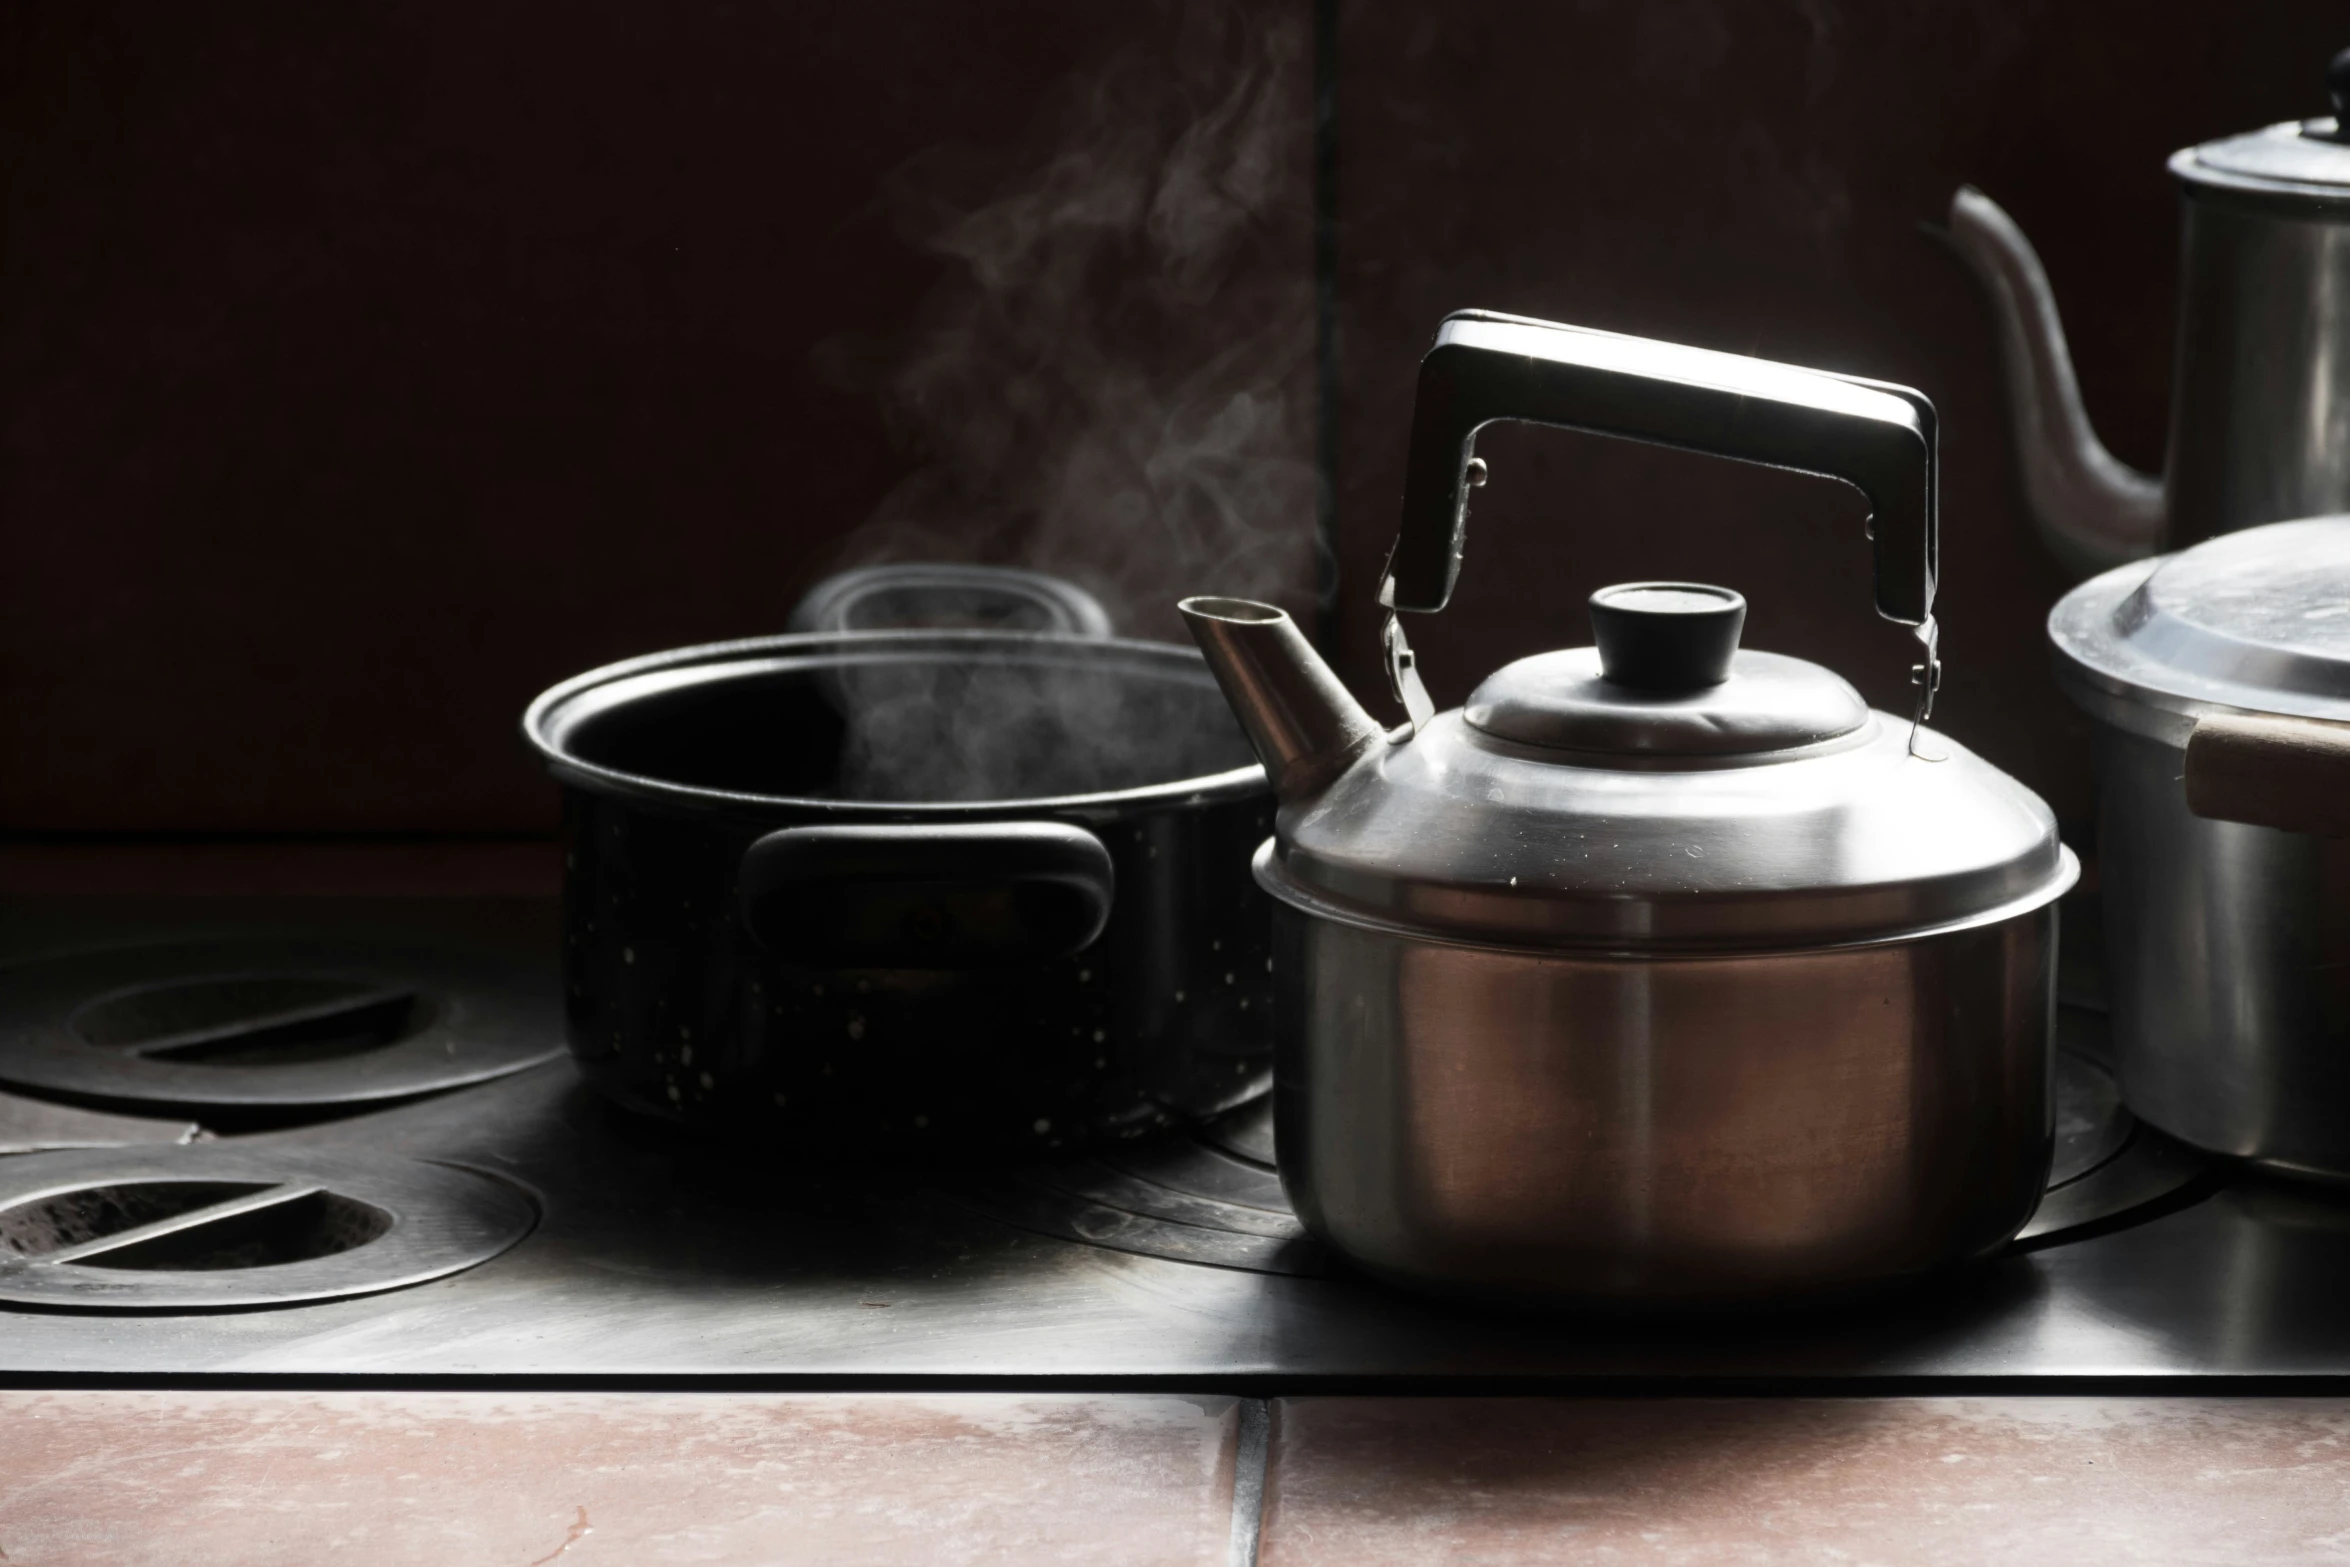 pots and pans sit on a stove and burners